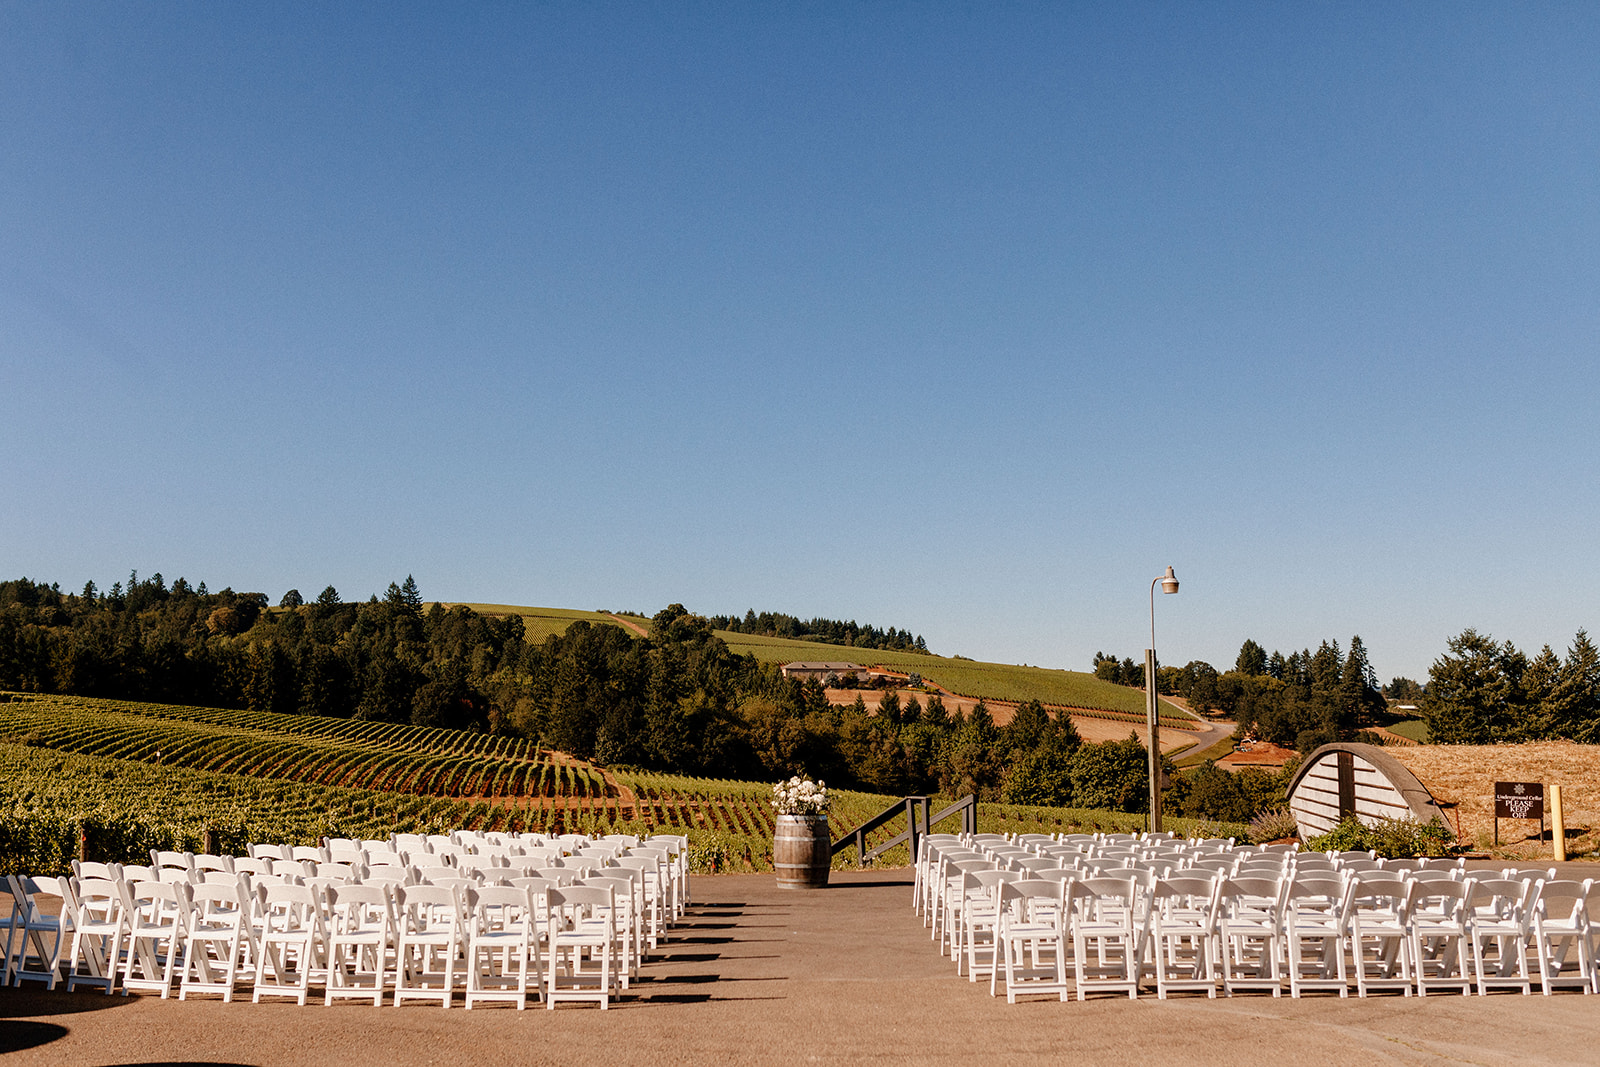 A wedding ceremony set up at Sokol Blosser winery.